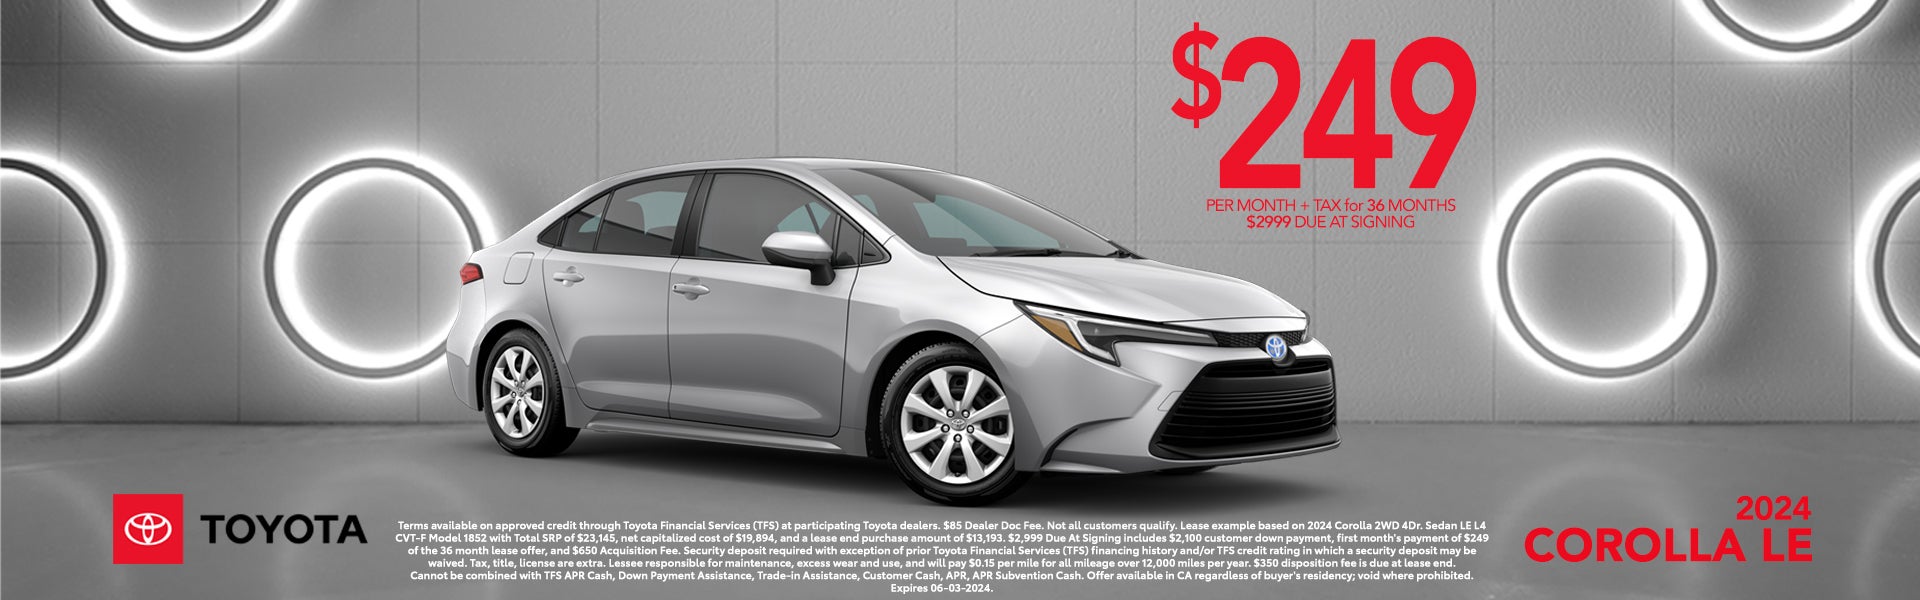 2024 Corolla LE $249/month Lease Offer